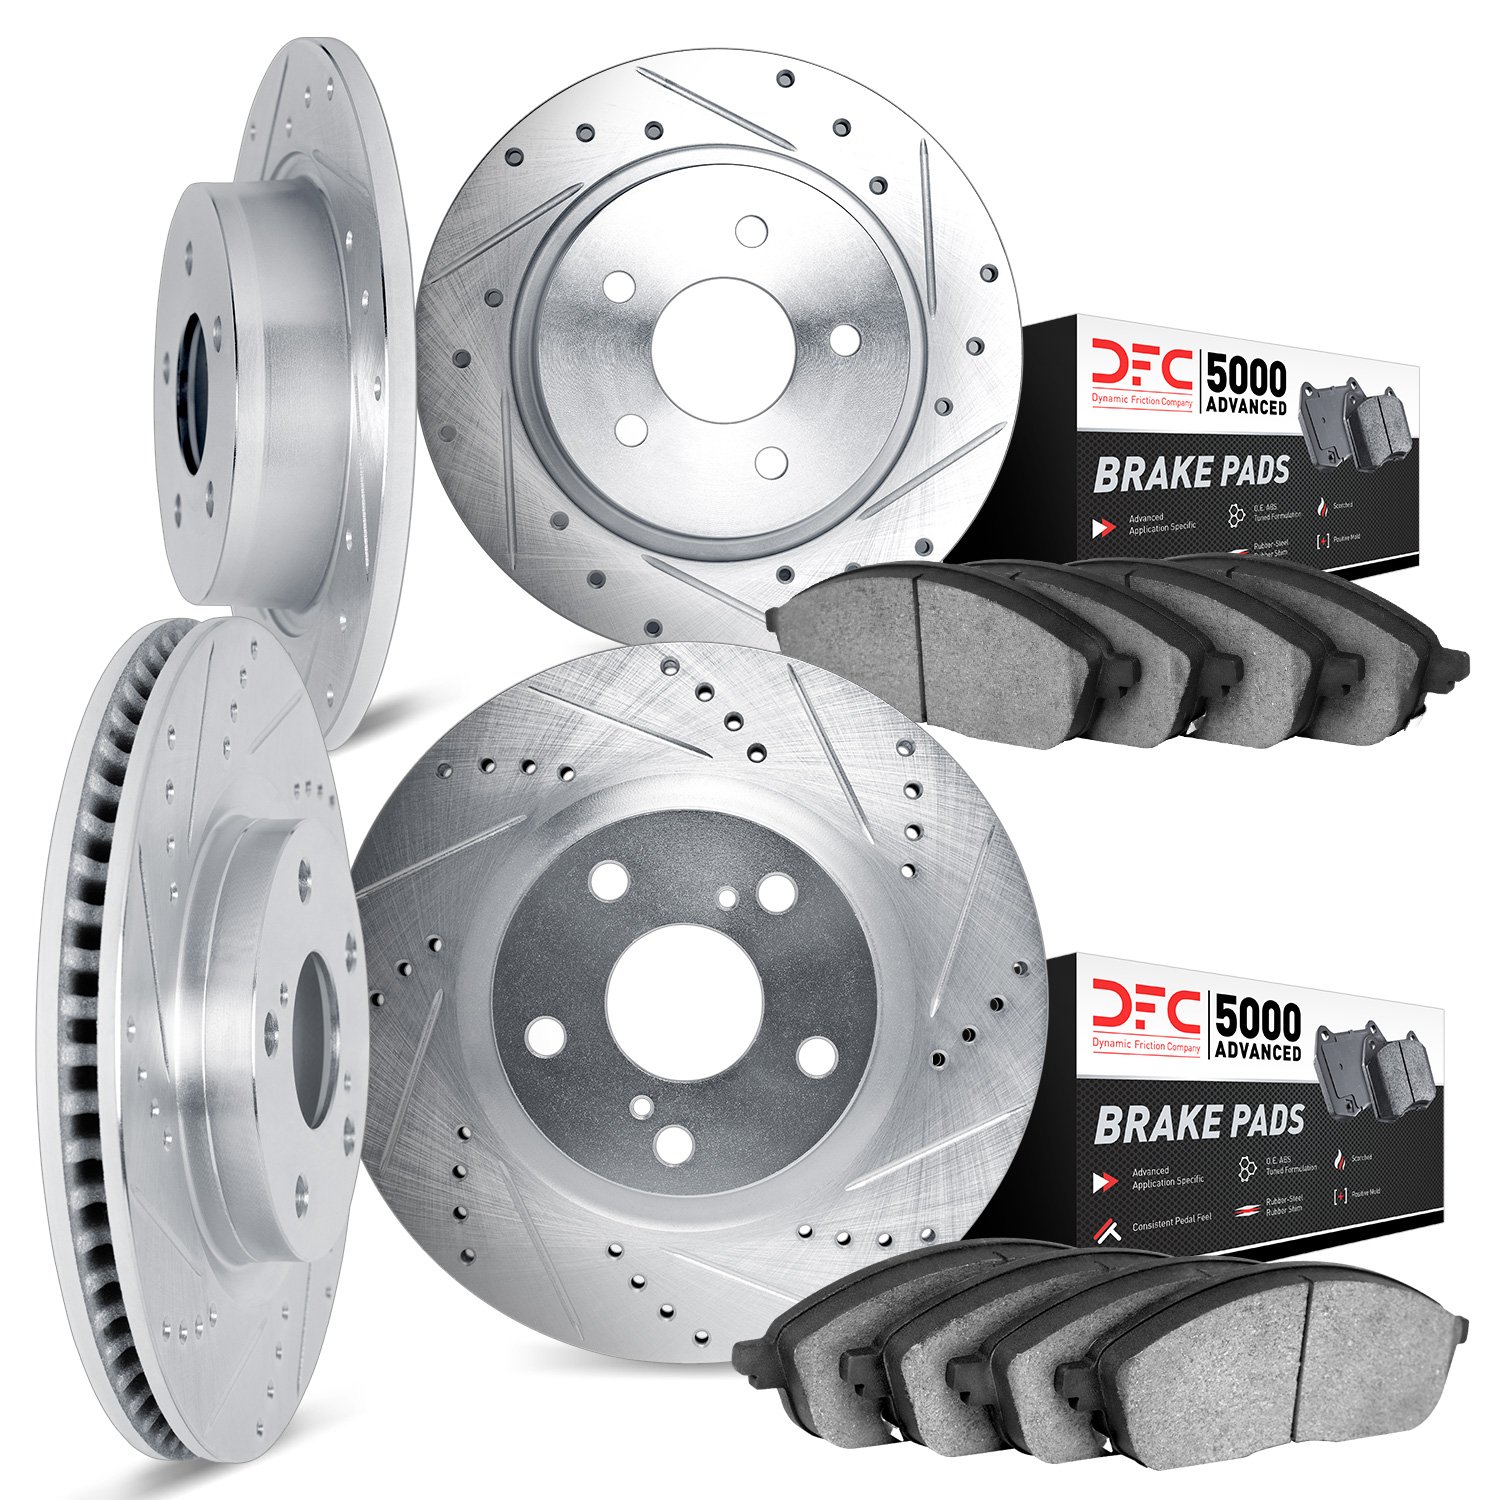 7504-67097 Drilled/Slotted Brake Rotors w/5000 Advanced Brake Pads Kit [Silver], 2004-2005 Infiniti/Nissan, Position: Front and